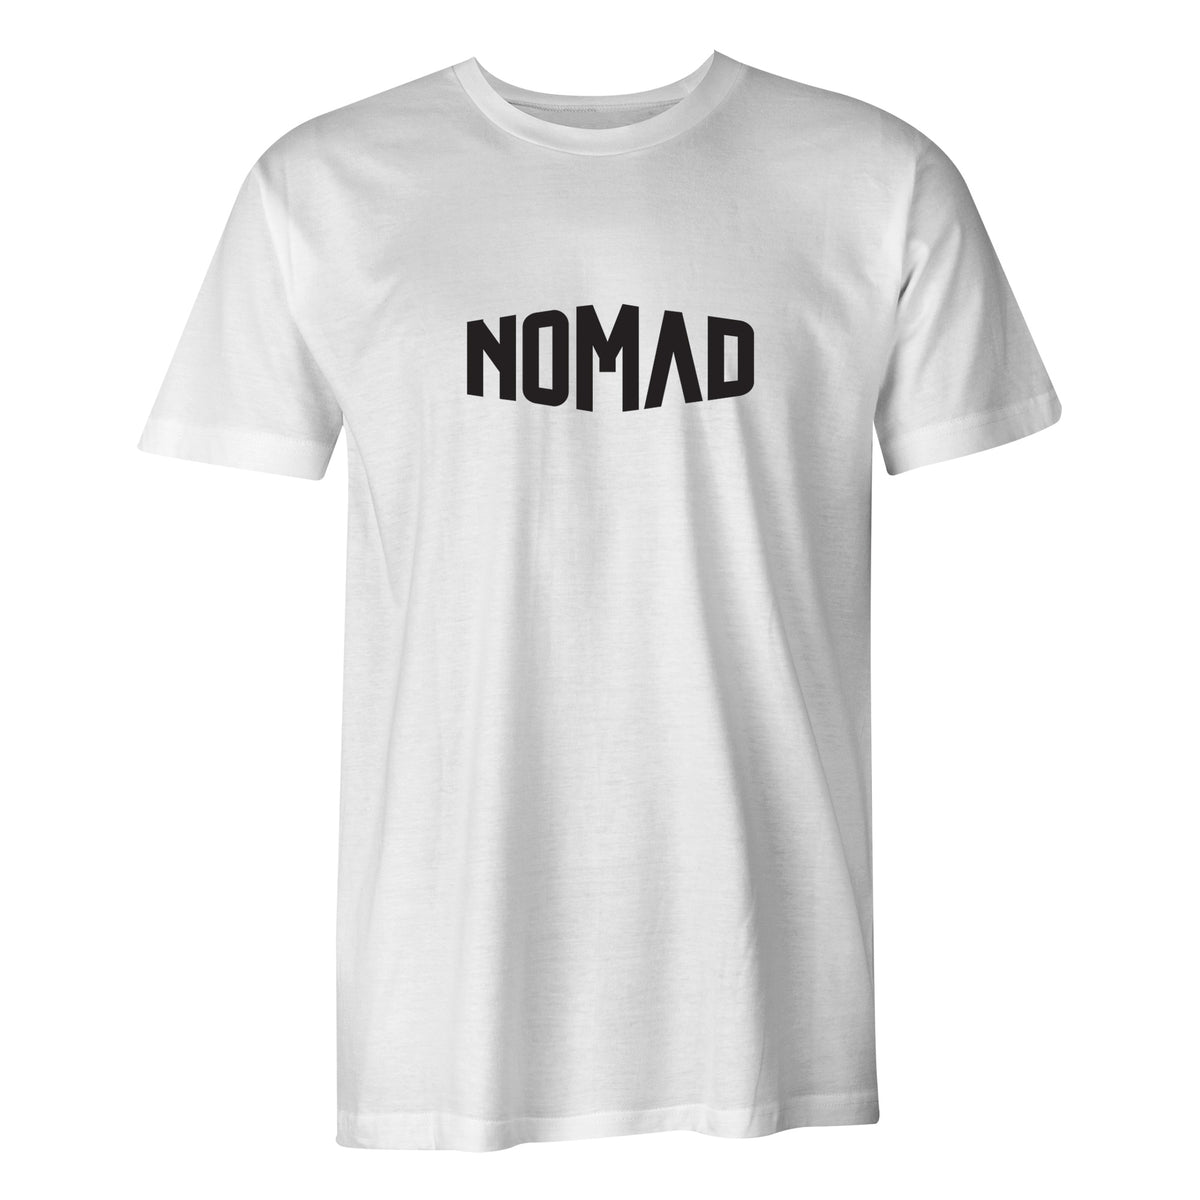 Nomad 20 Years T-Shirt